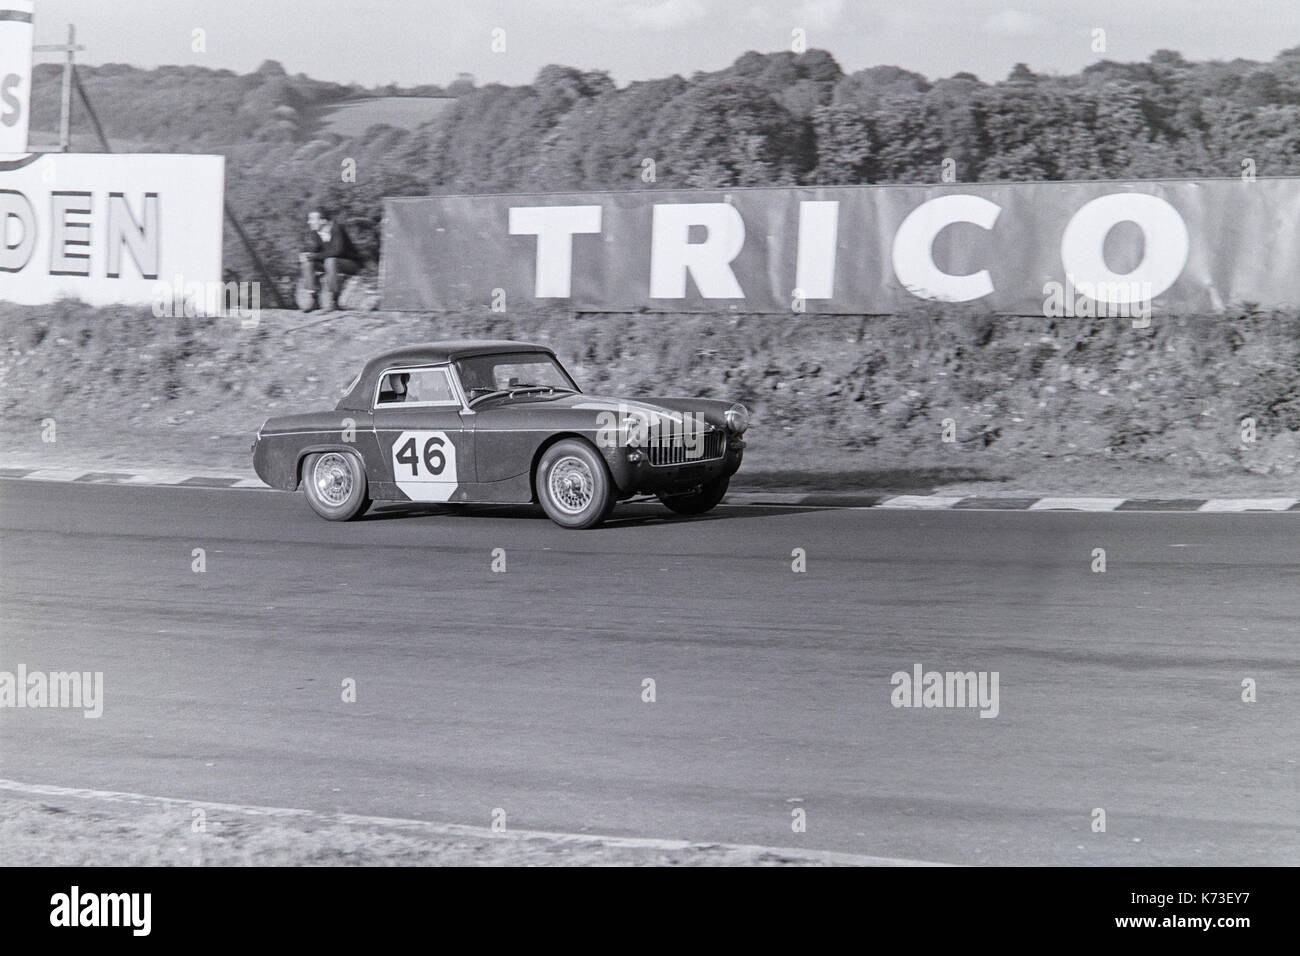 MG Midget racing at Brands Hatch Motor Racing Circuit in England during the 1960s. Stock Photo